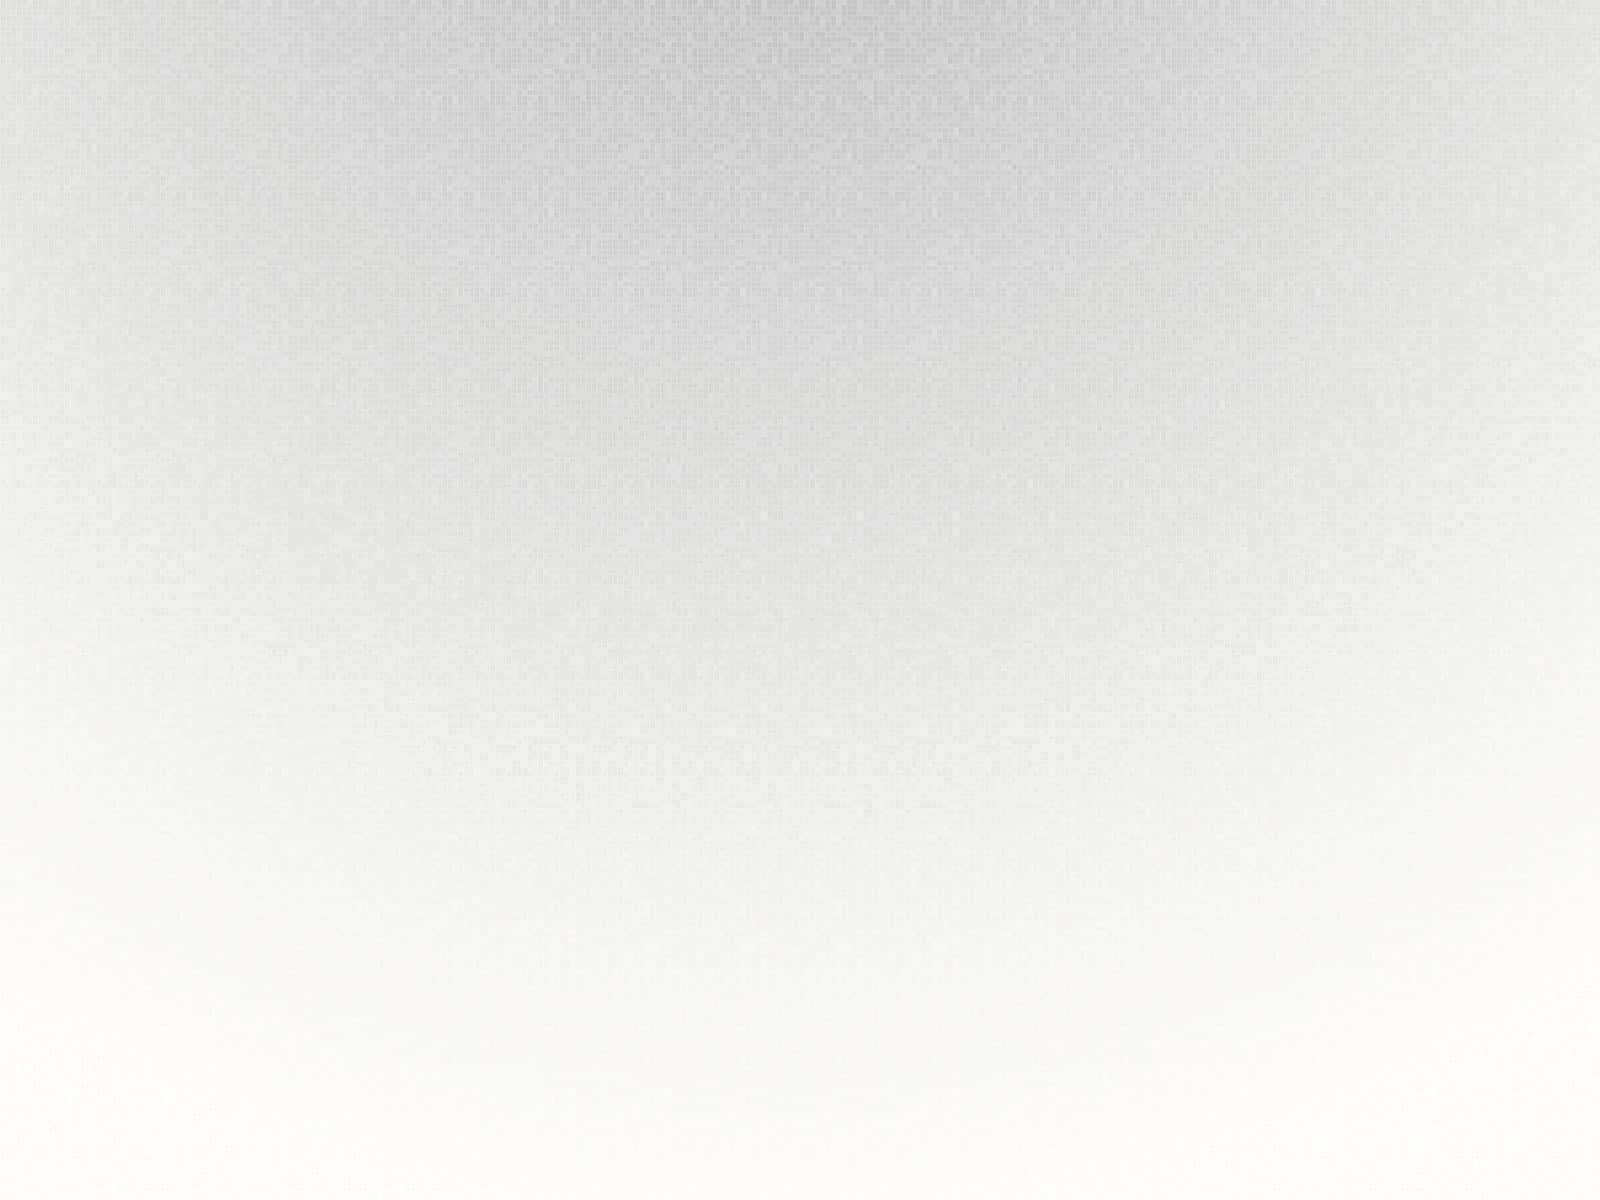 A Blank White Canvas for You to Explore